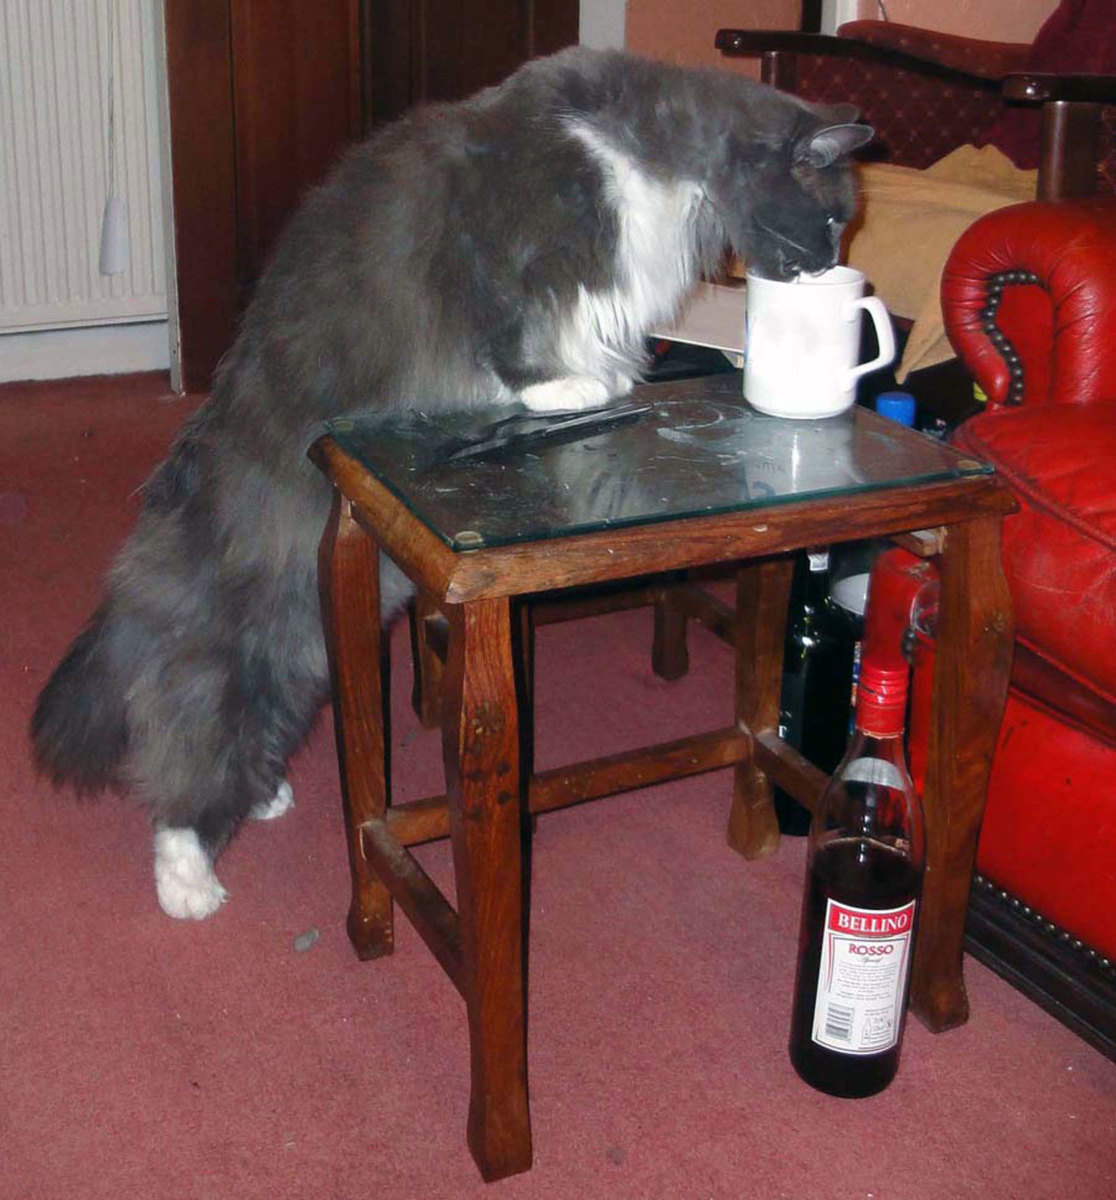 Our Maine Coon, big as a small dog; with wine bottle in foreground as size comparison.